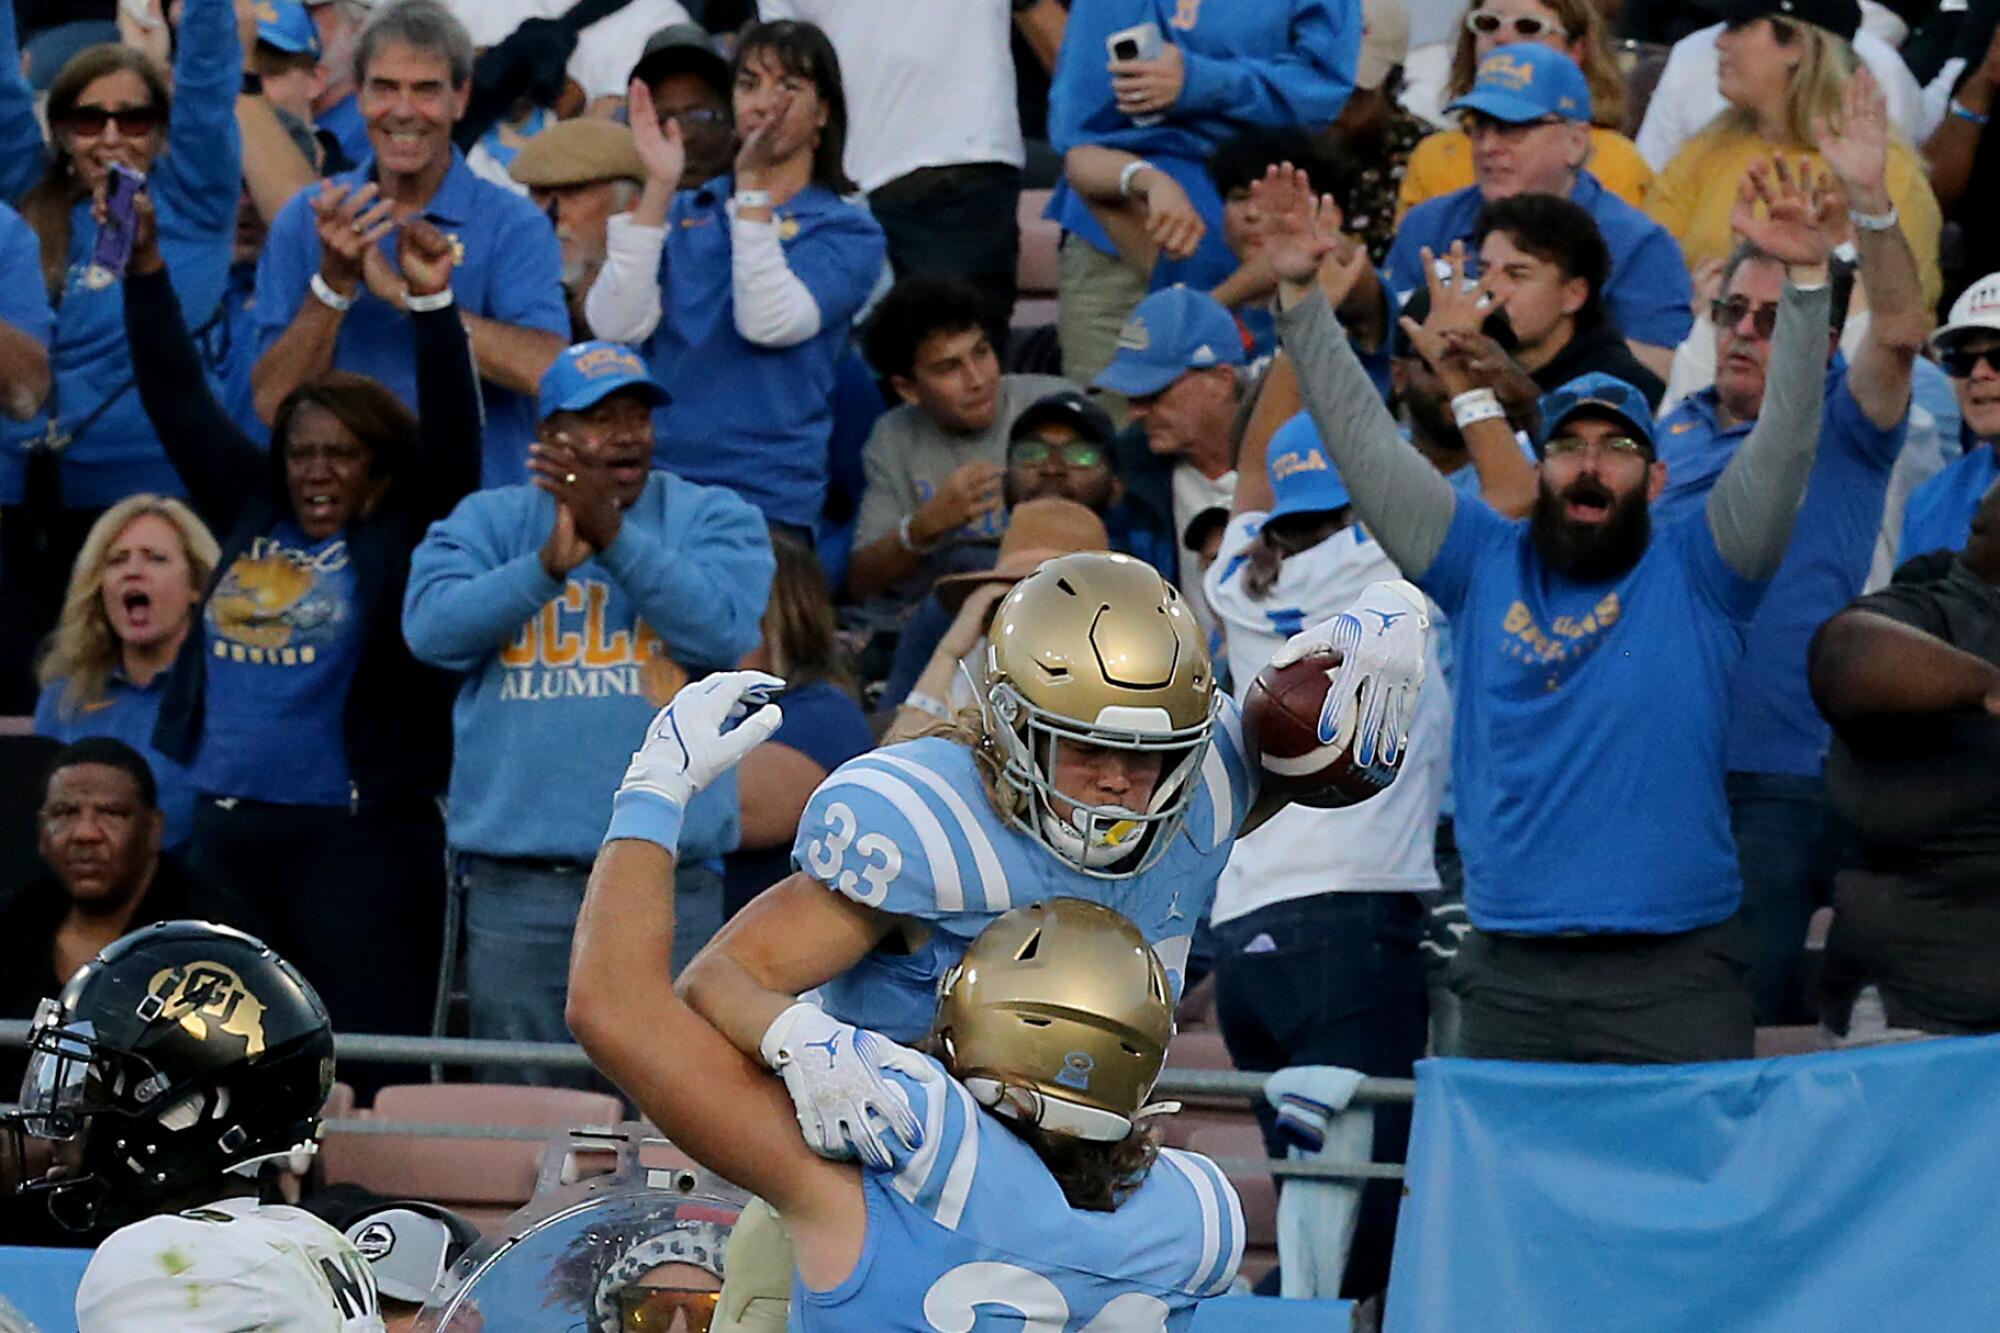 UCLA running back Carson Steele celebrates with teammate Carsen Ryan after scoring a touchdown against Colorado.